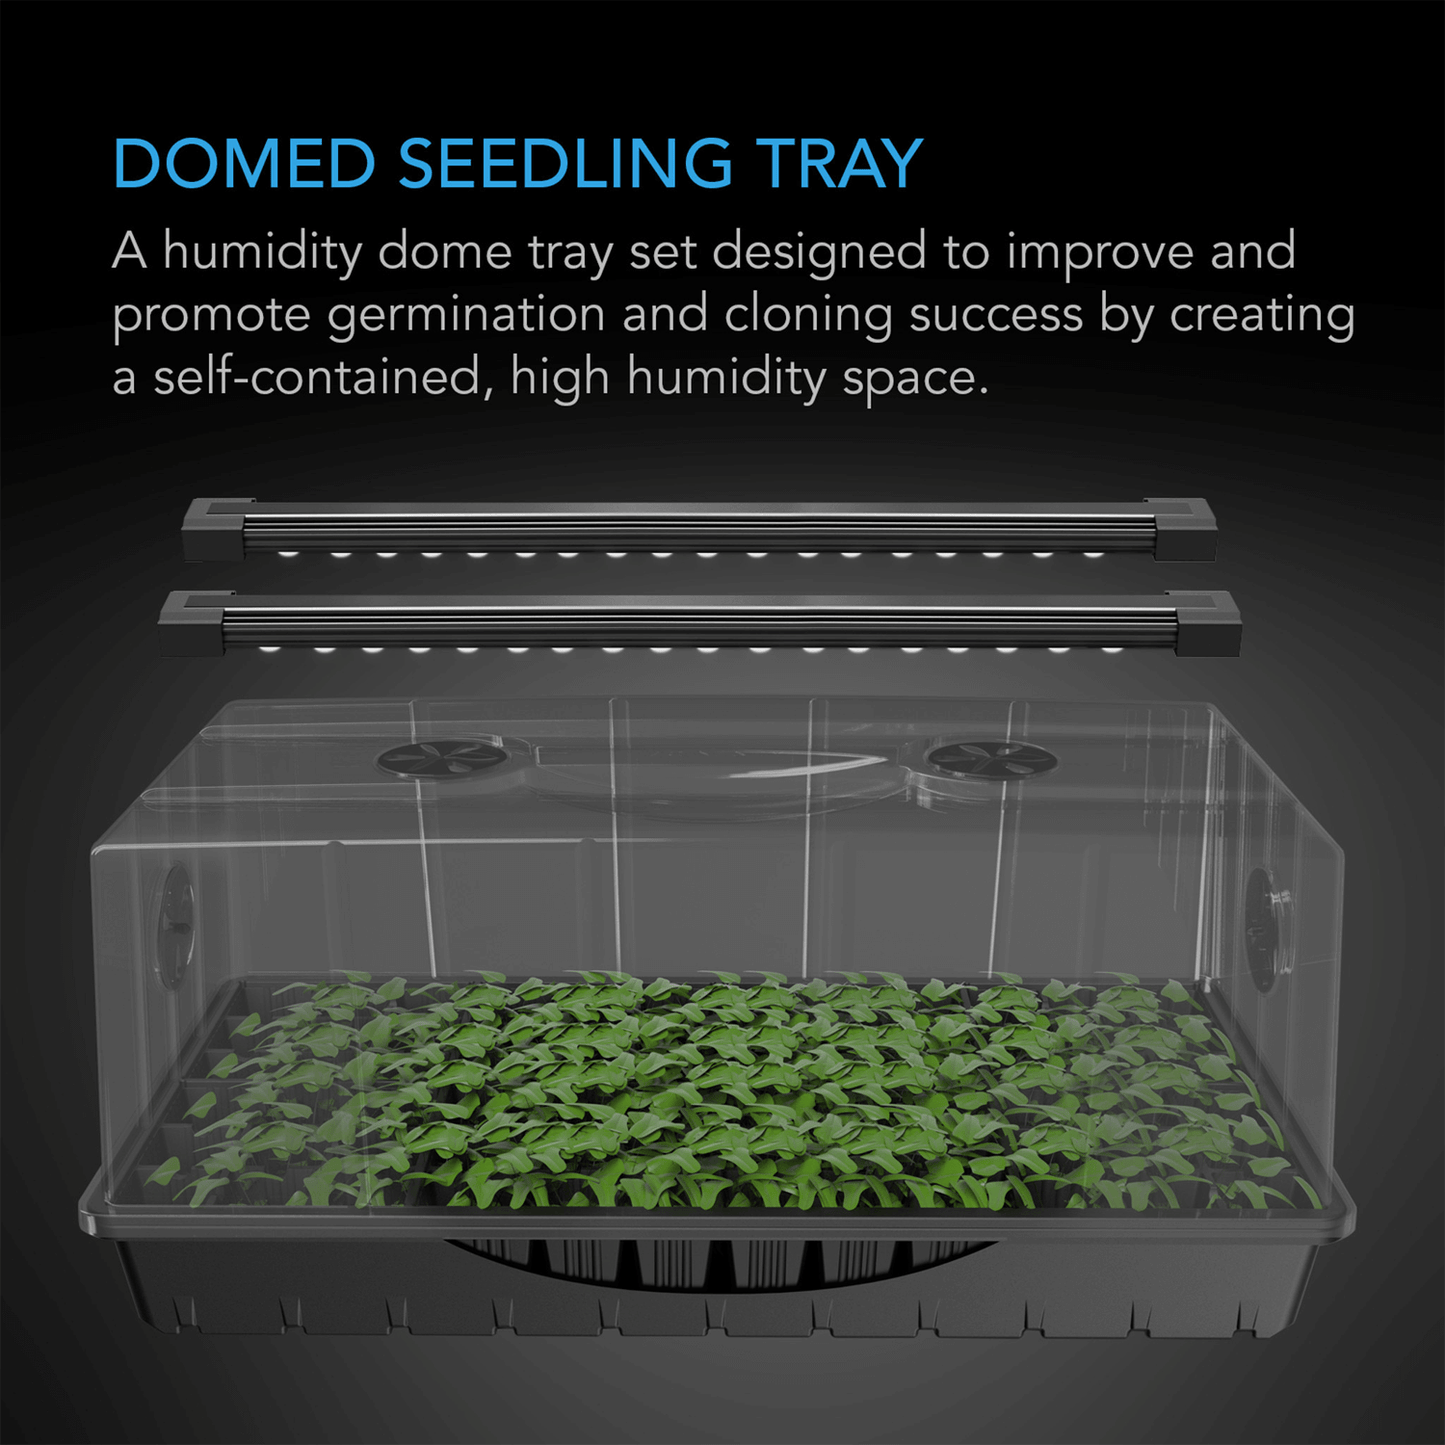 AC Infinity Humidity Dome, Germination Kit with LED Grow Light Bars, 6x12 Cell Tray AC-HDL7 Planting & Watering 819137023871